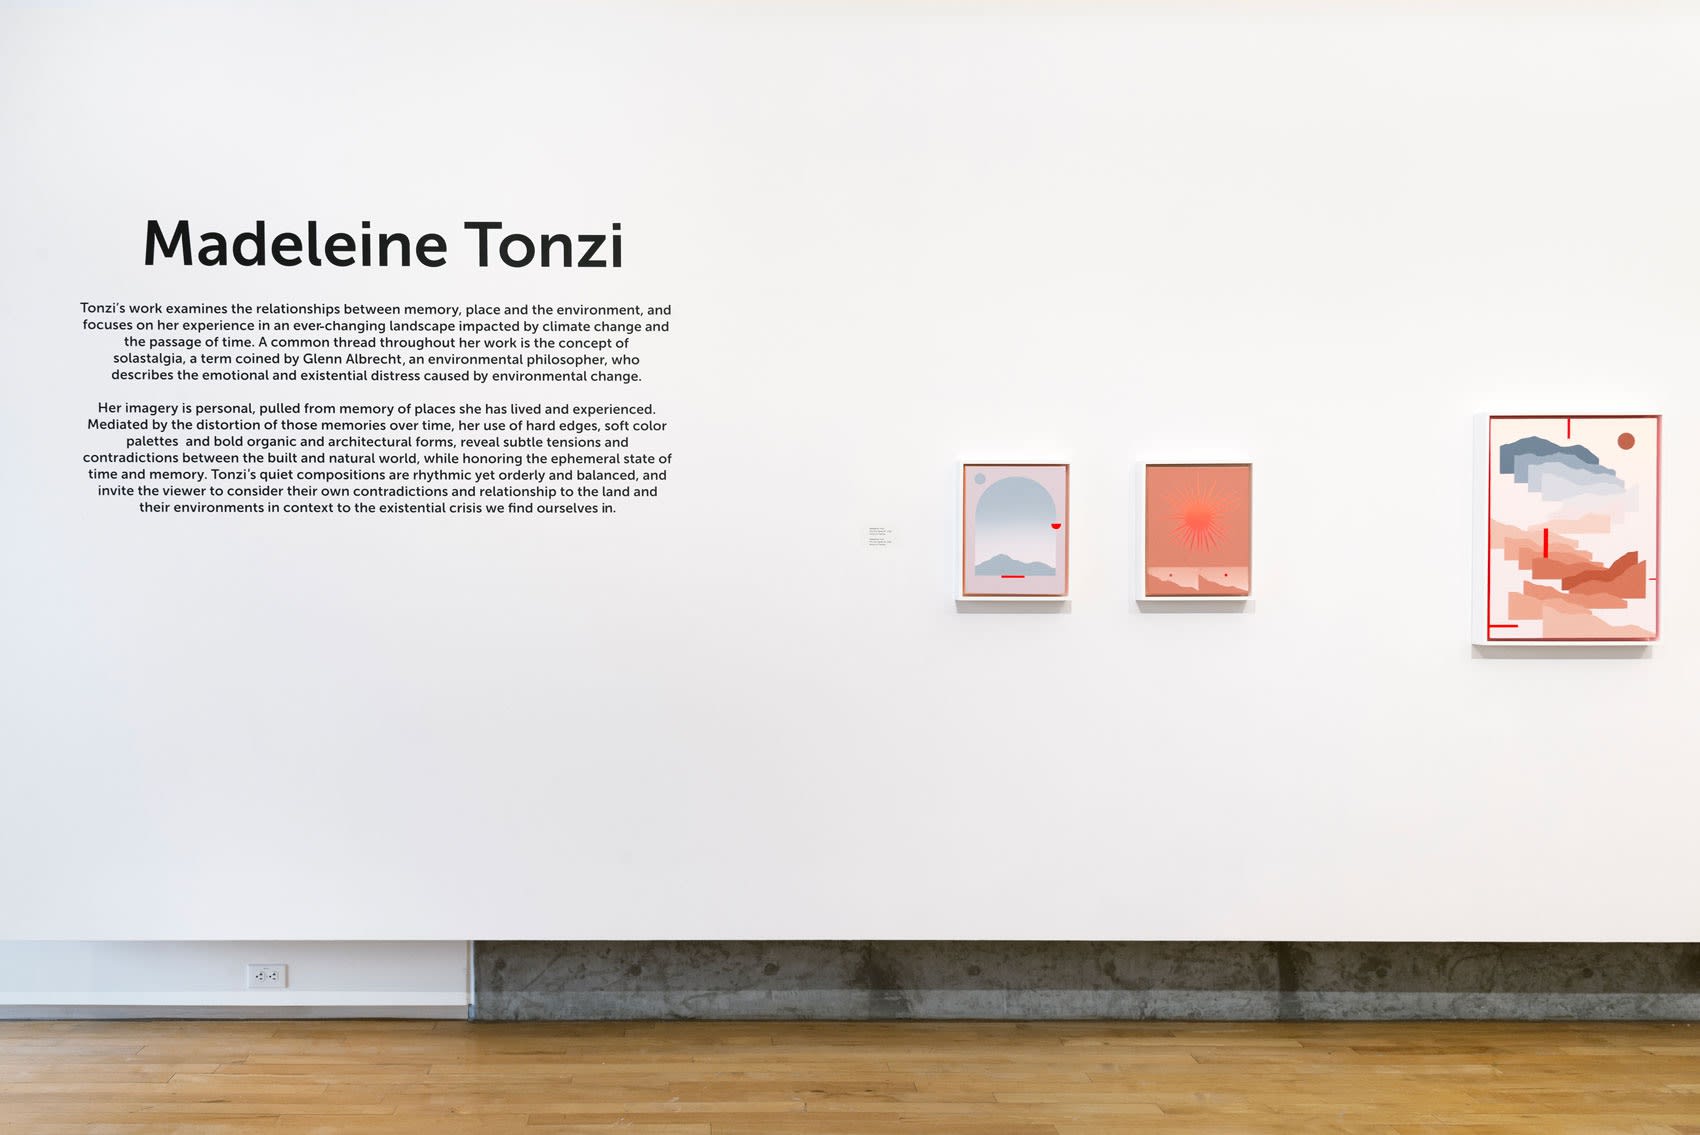 Installation shot of Madeline Tonzi's work at the Westmont Ridley-Tree Museum of Art